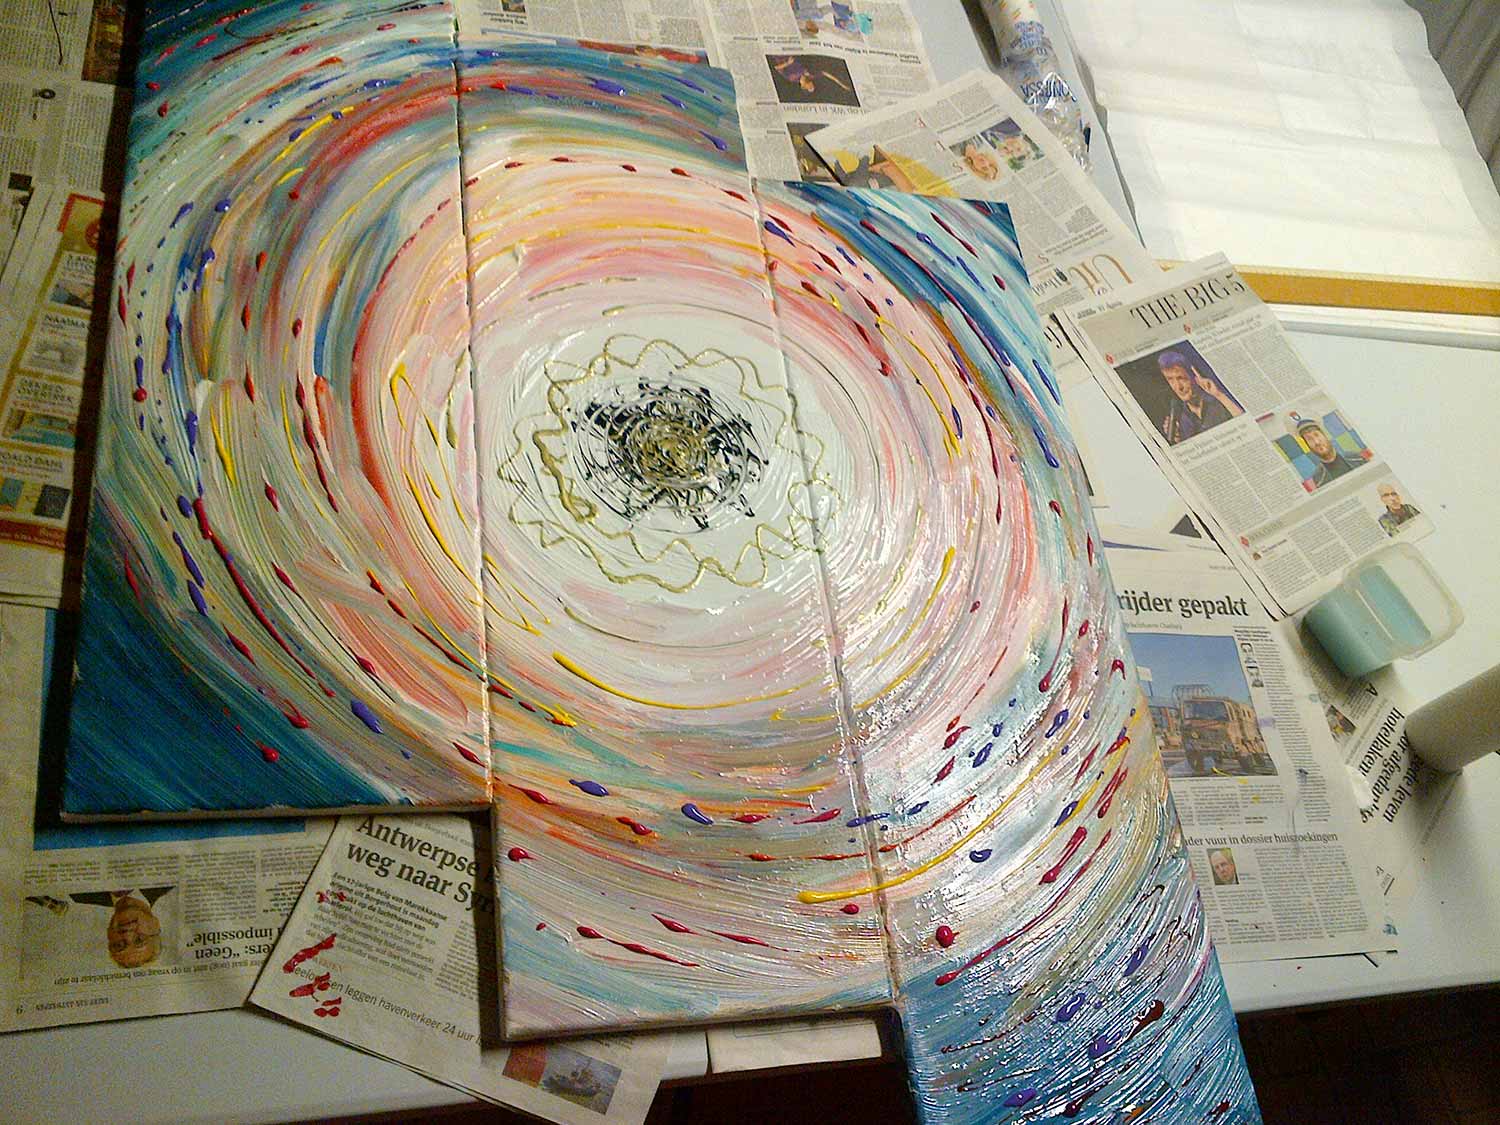 'Birth of the Universe' left for drying.. Due to the thick layers of paint it can take up to two weeks to completely dry out